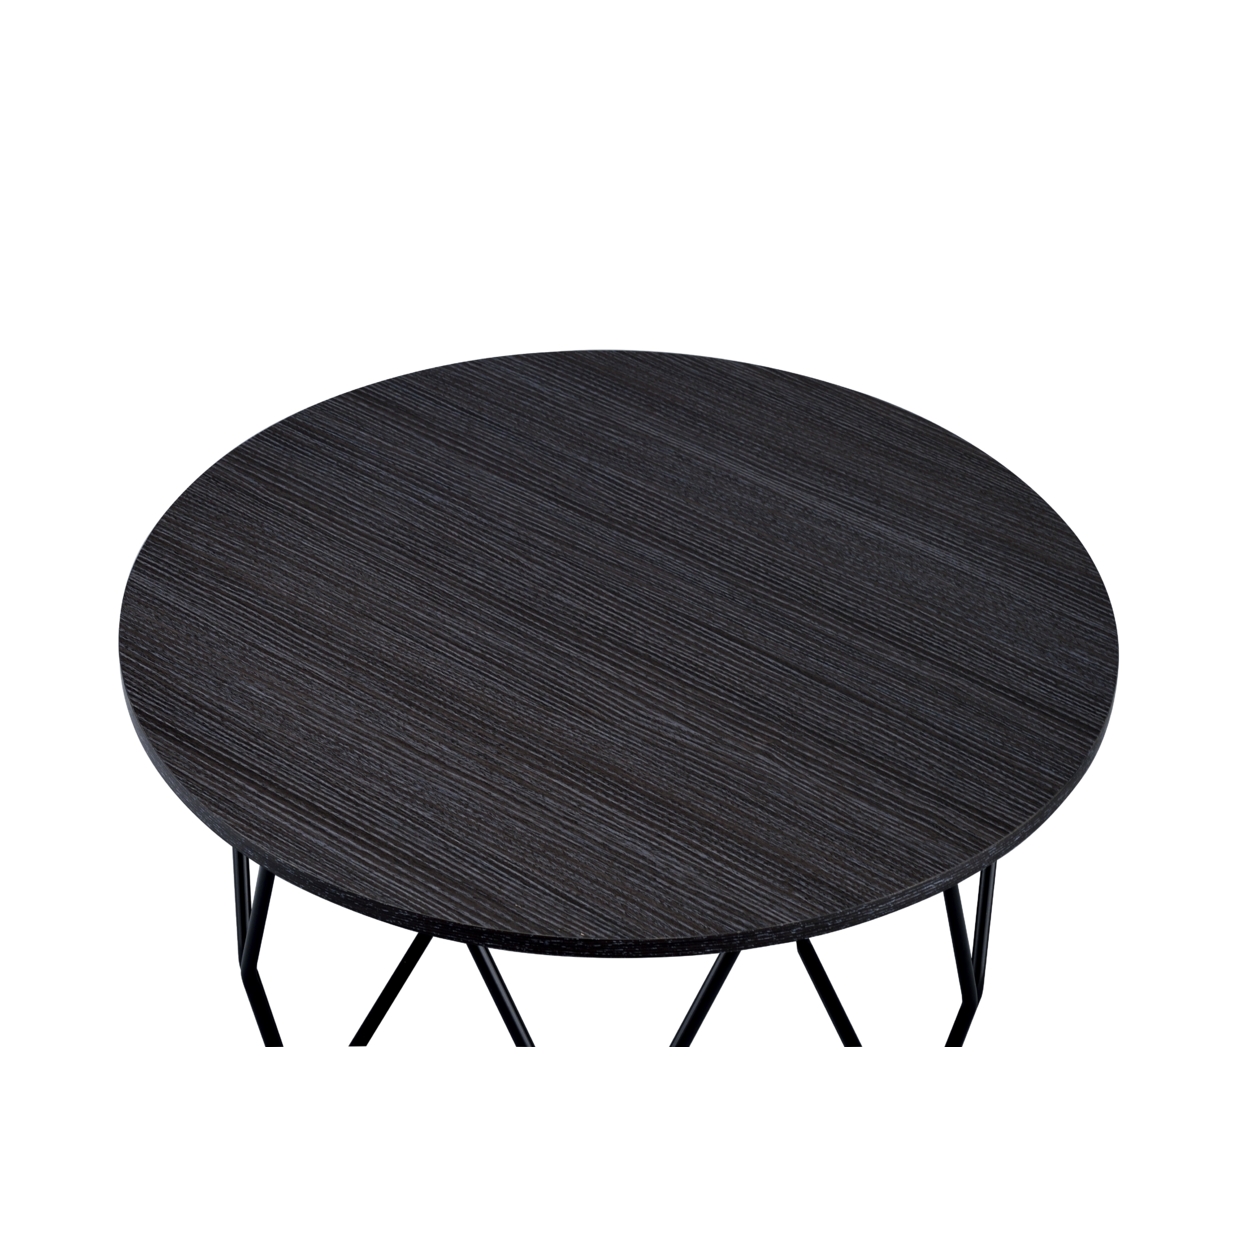 Industrial Round Top Wooden Coffee Table With Geometric Base, Black- Saltoro Sherpi